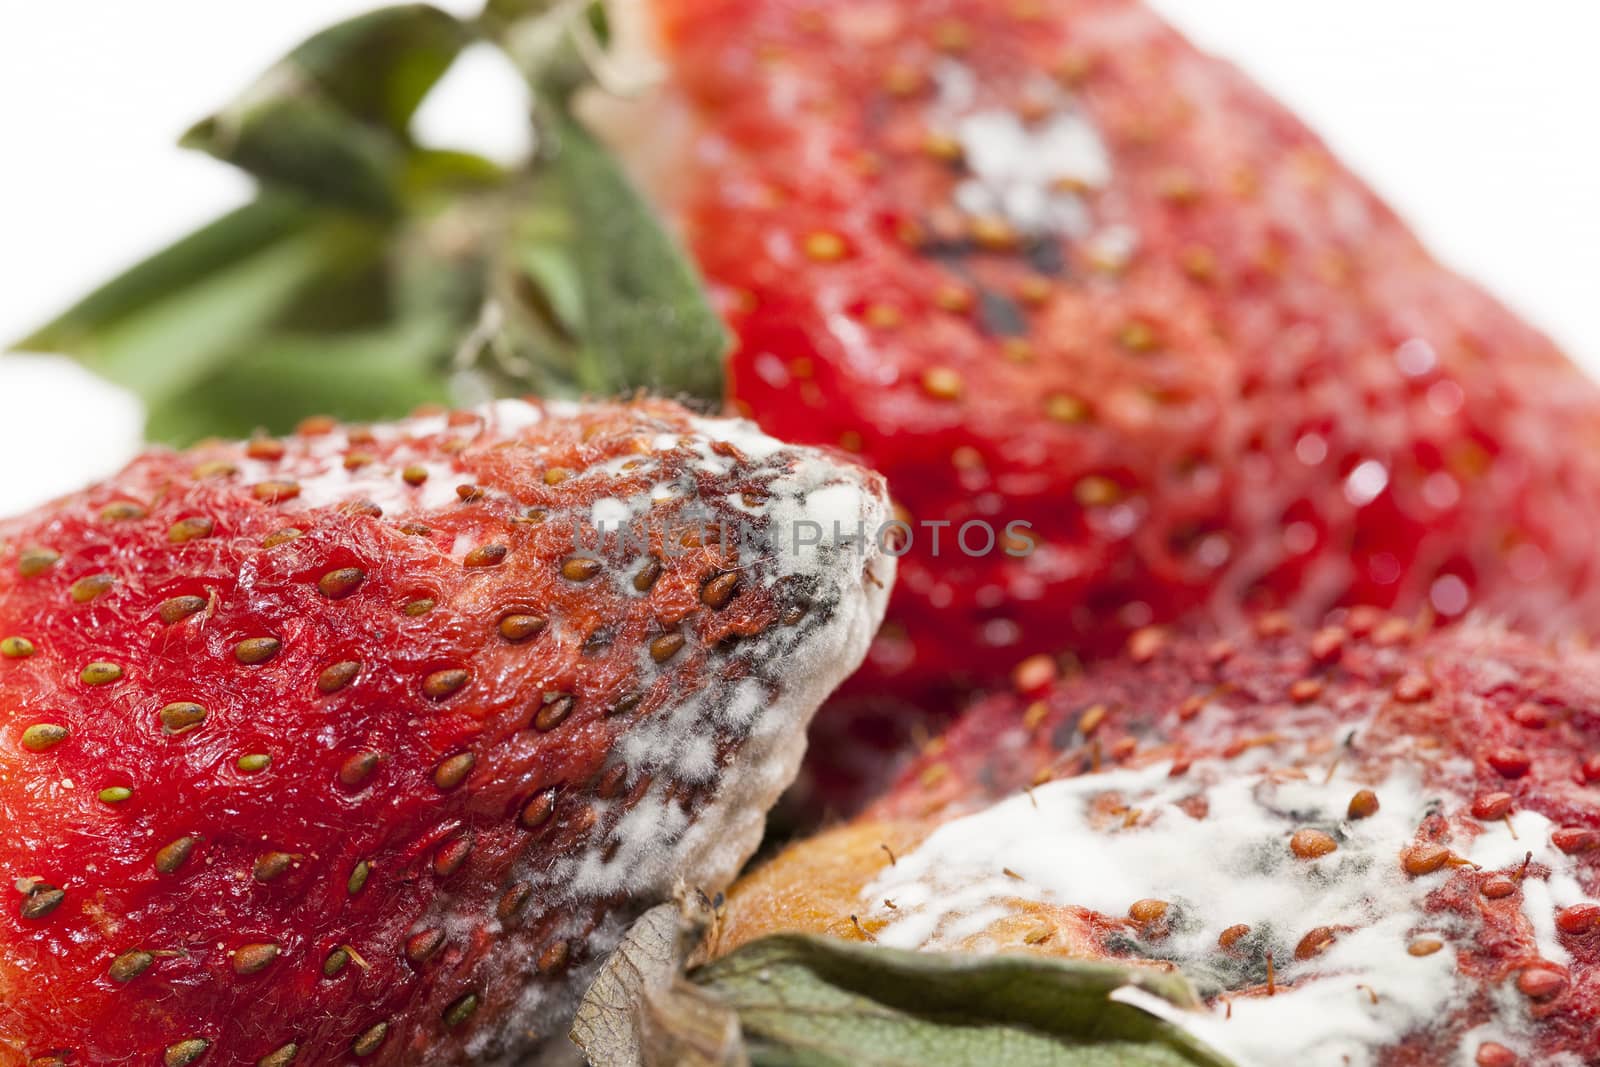 Strawberry with mold by avq